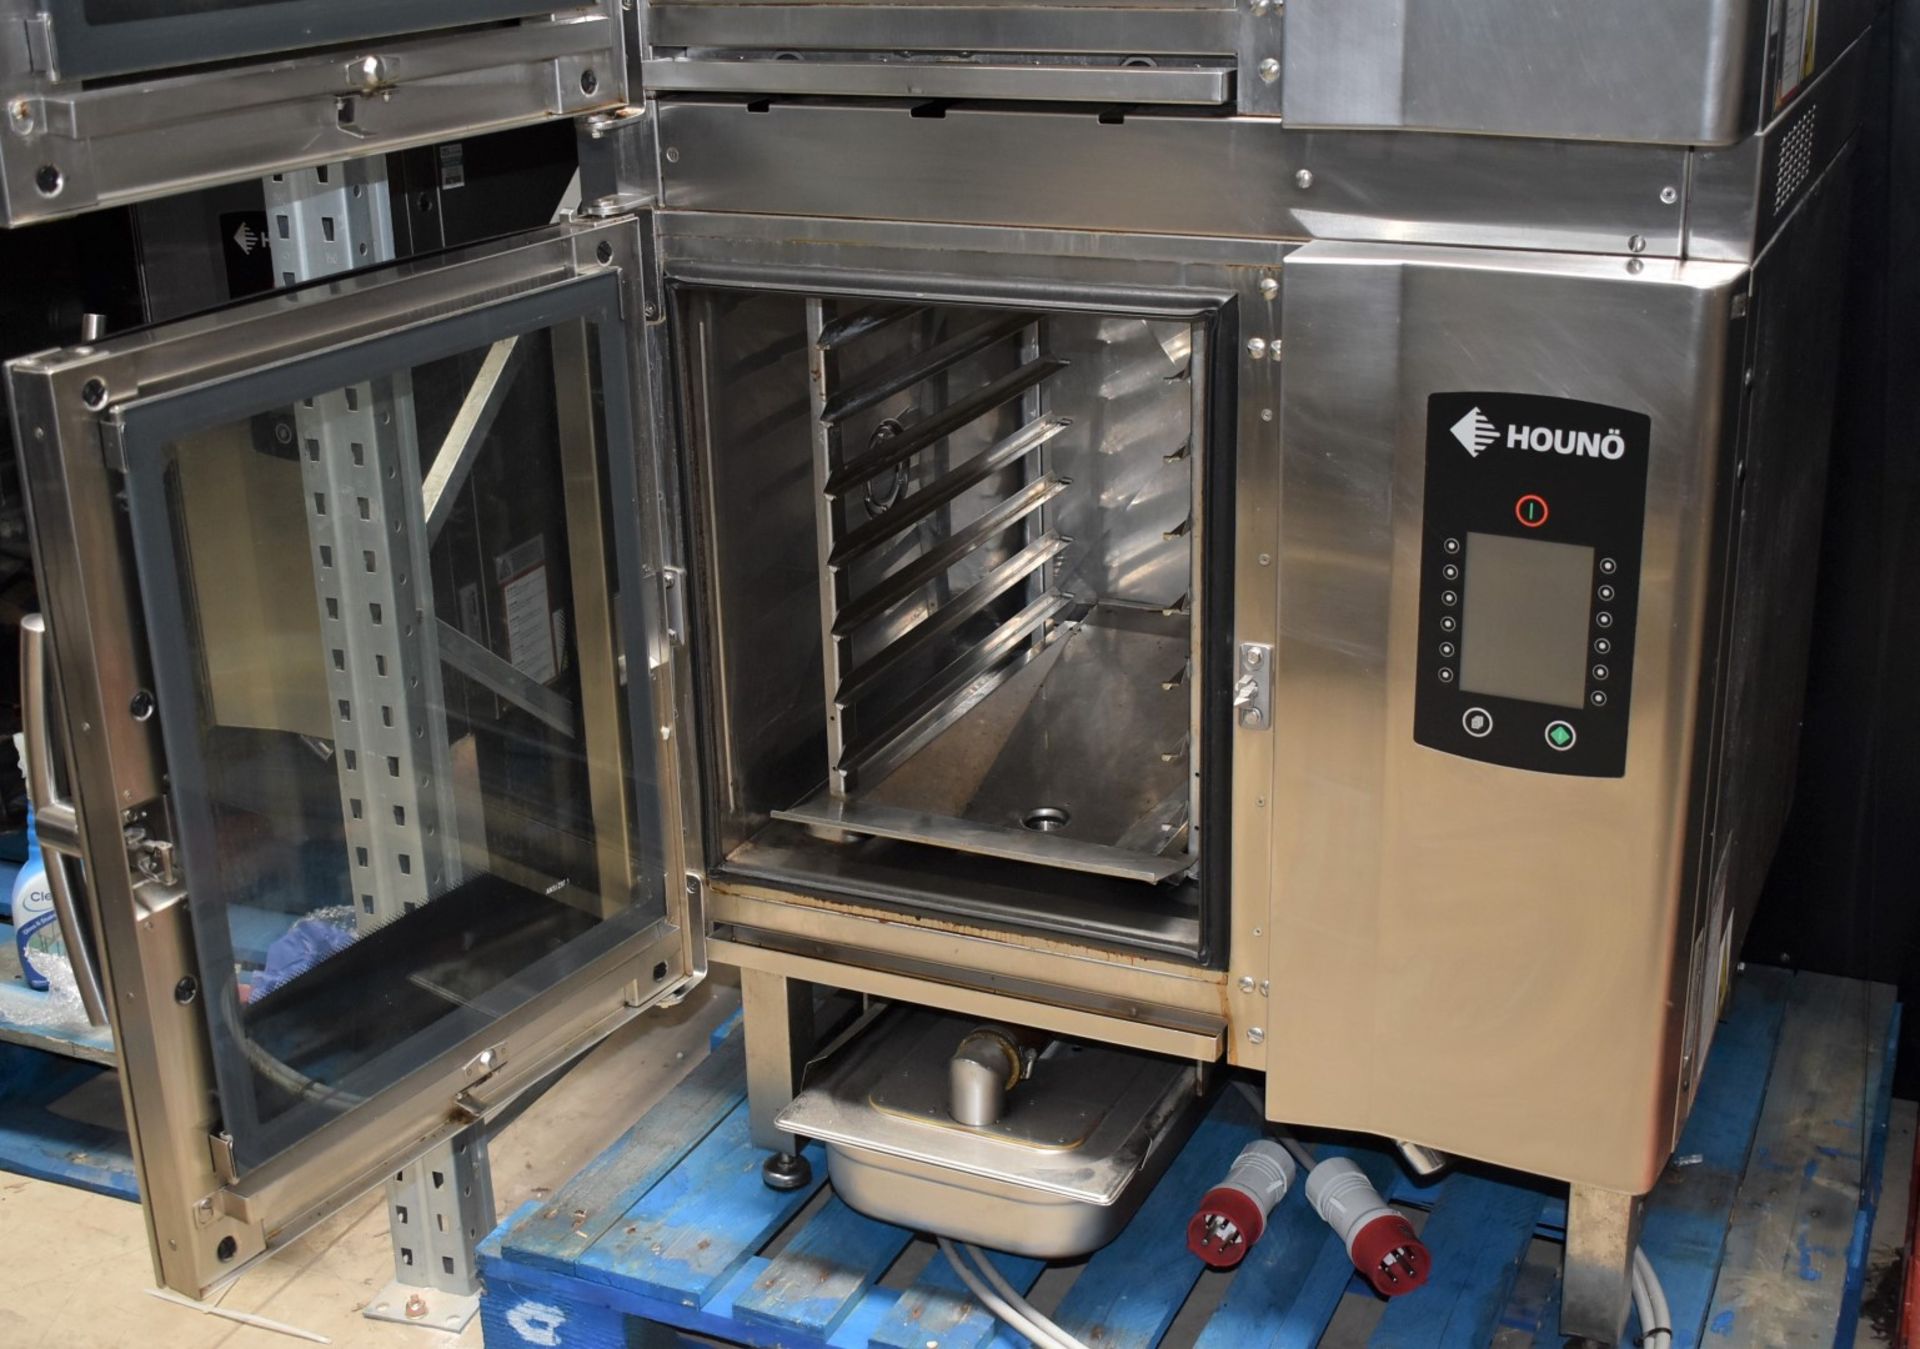 1 x Houno Double 6 Grid Stacked Combi Oven - Model: C 1.06 / CPE 1.06 - 3 Phase - Image 2 of 21